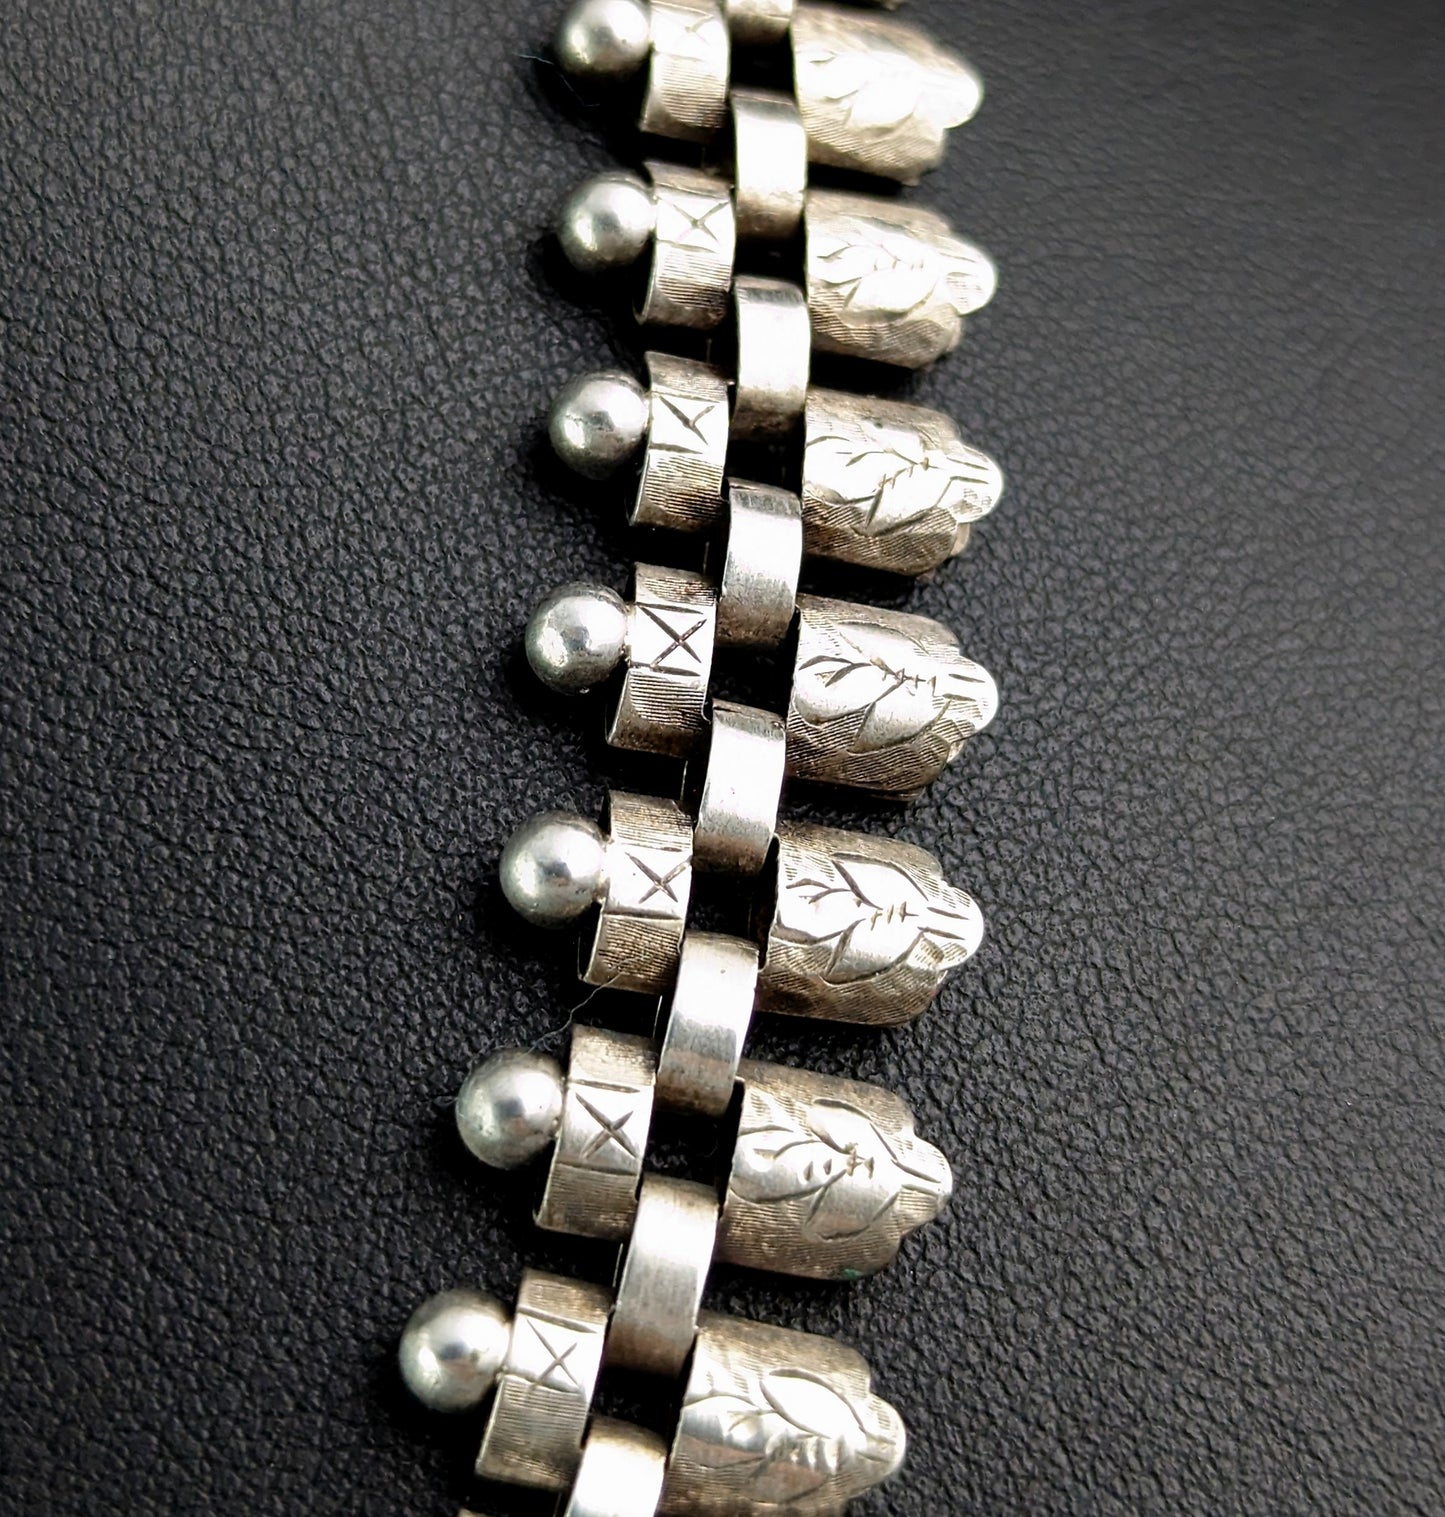 Antique Victorian sterling silver book chain necklace, Aesthetic